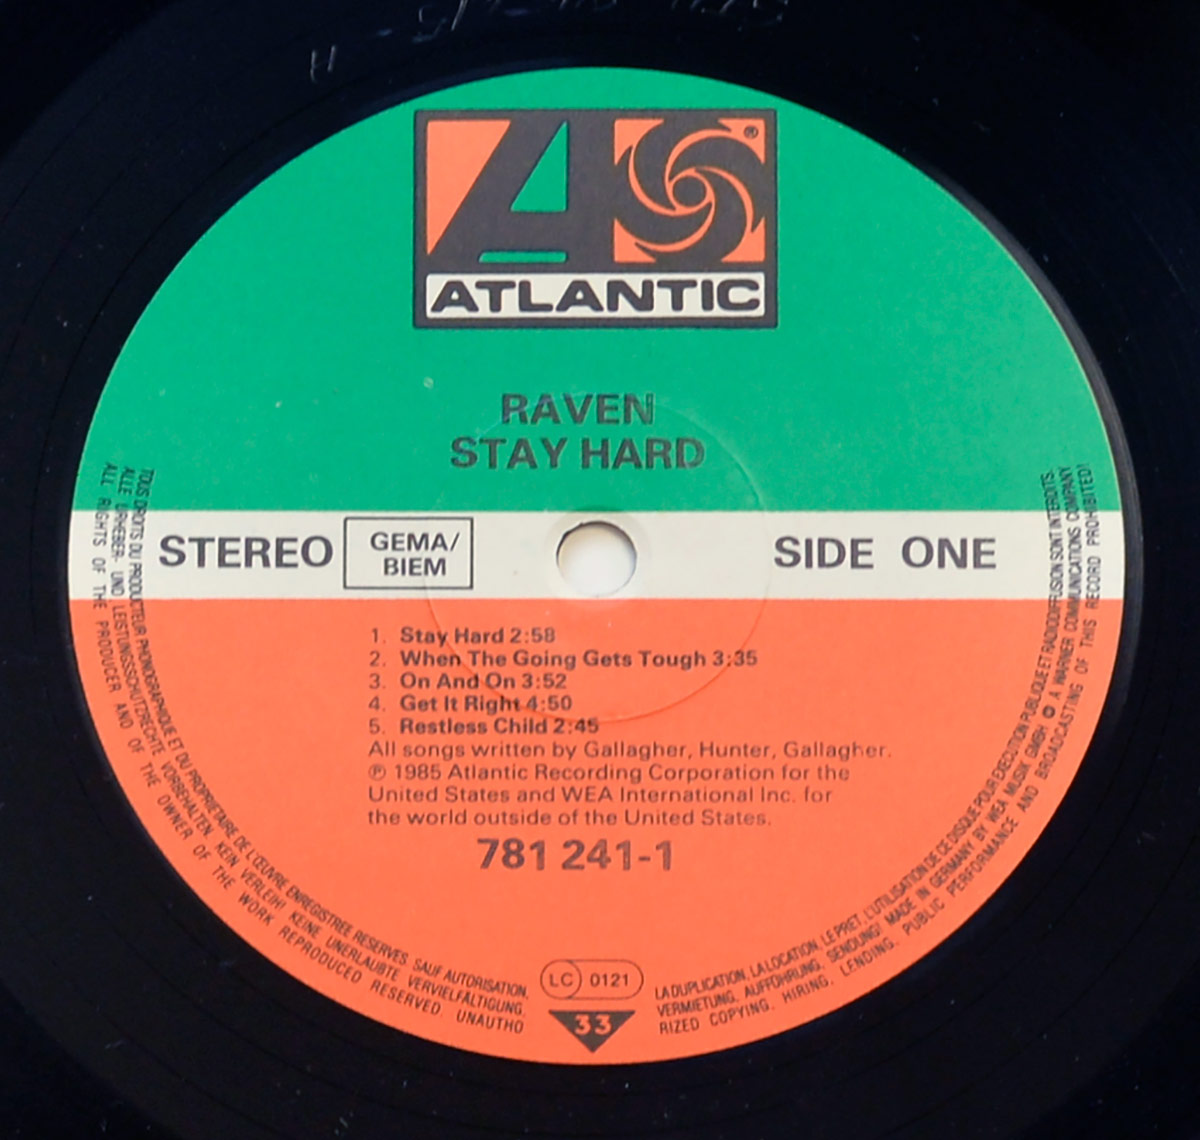 Photo of "RAVEN - STAY HARD" 12" LP Record - Side One: